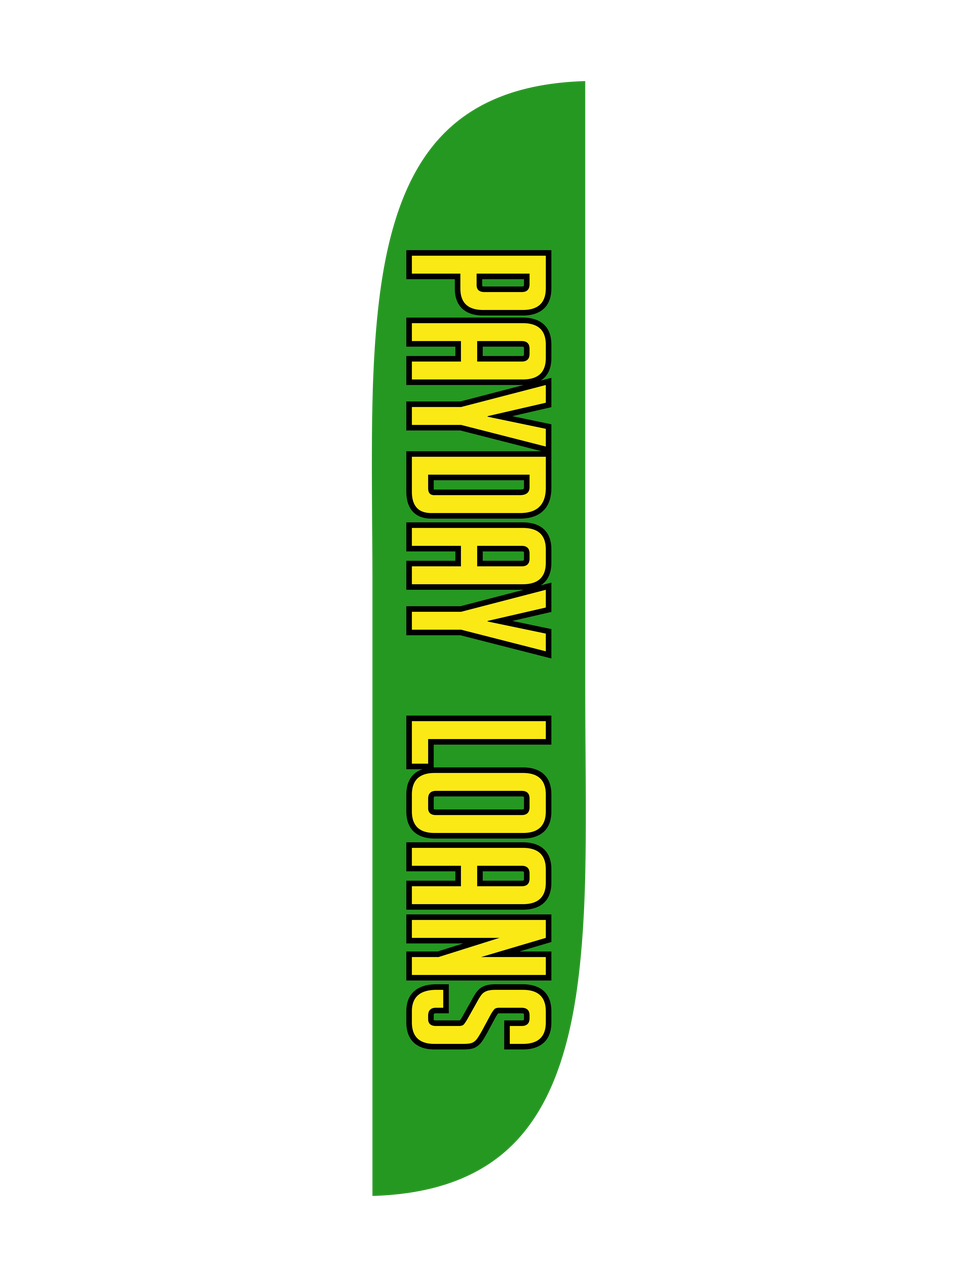 12ft Payday Loans Feather Flag Green